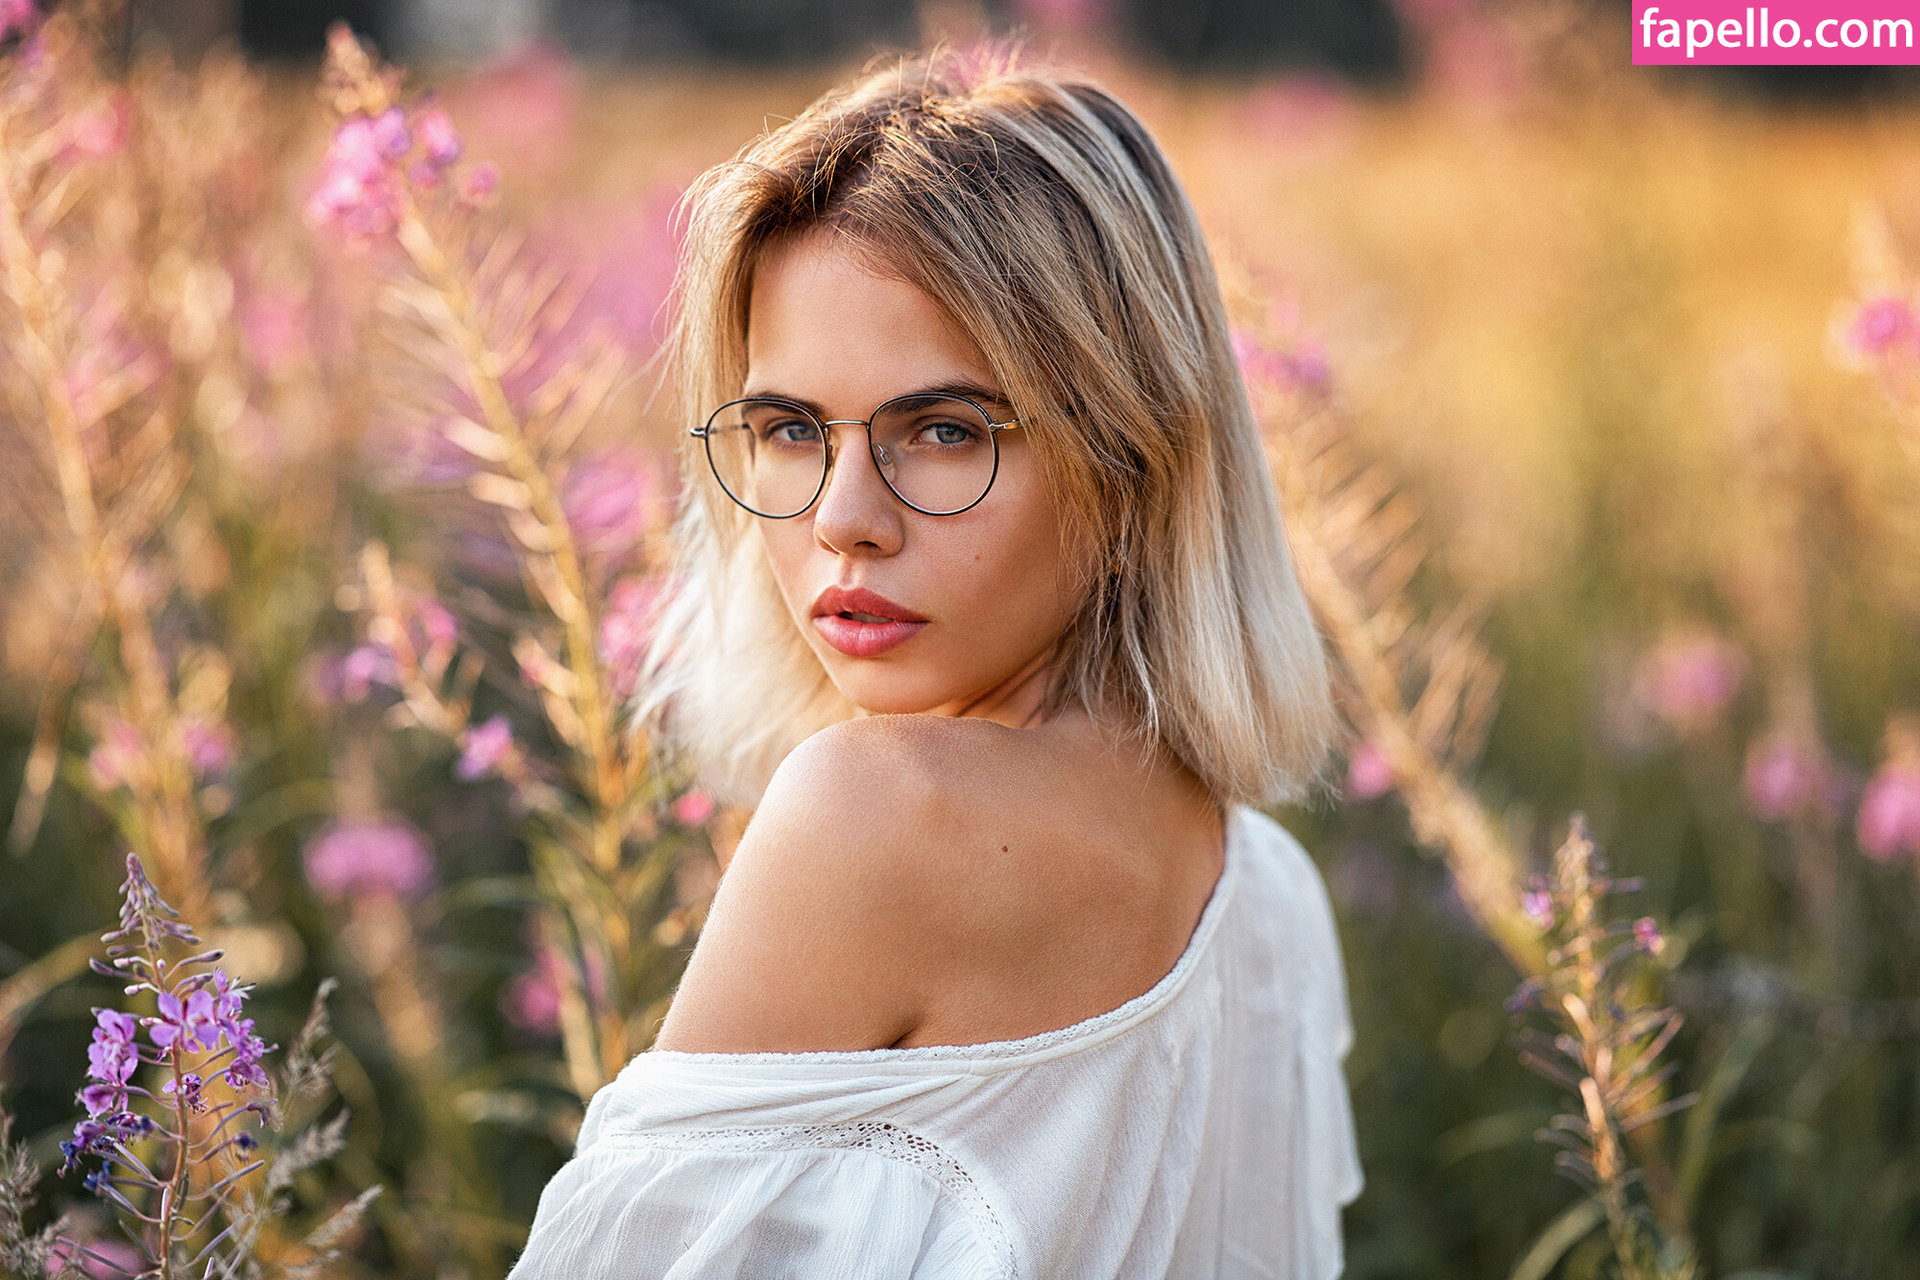 Women Model One Bare Shoulder Parted Lips Depth Of Field Looking Over Shoulder Women With Glasses Ou 1920x1280